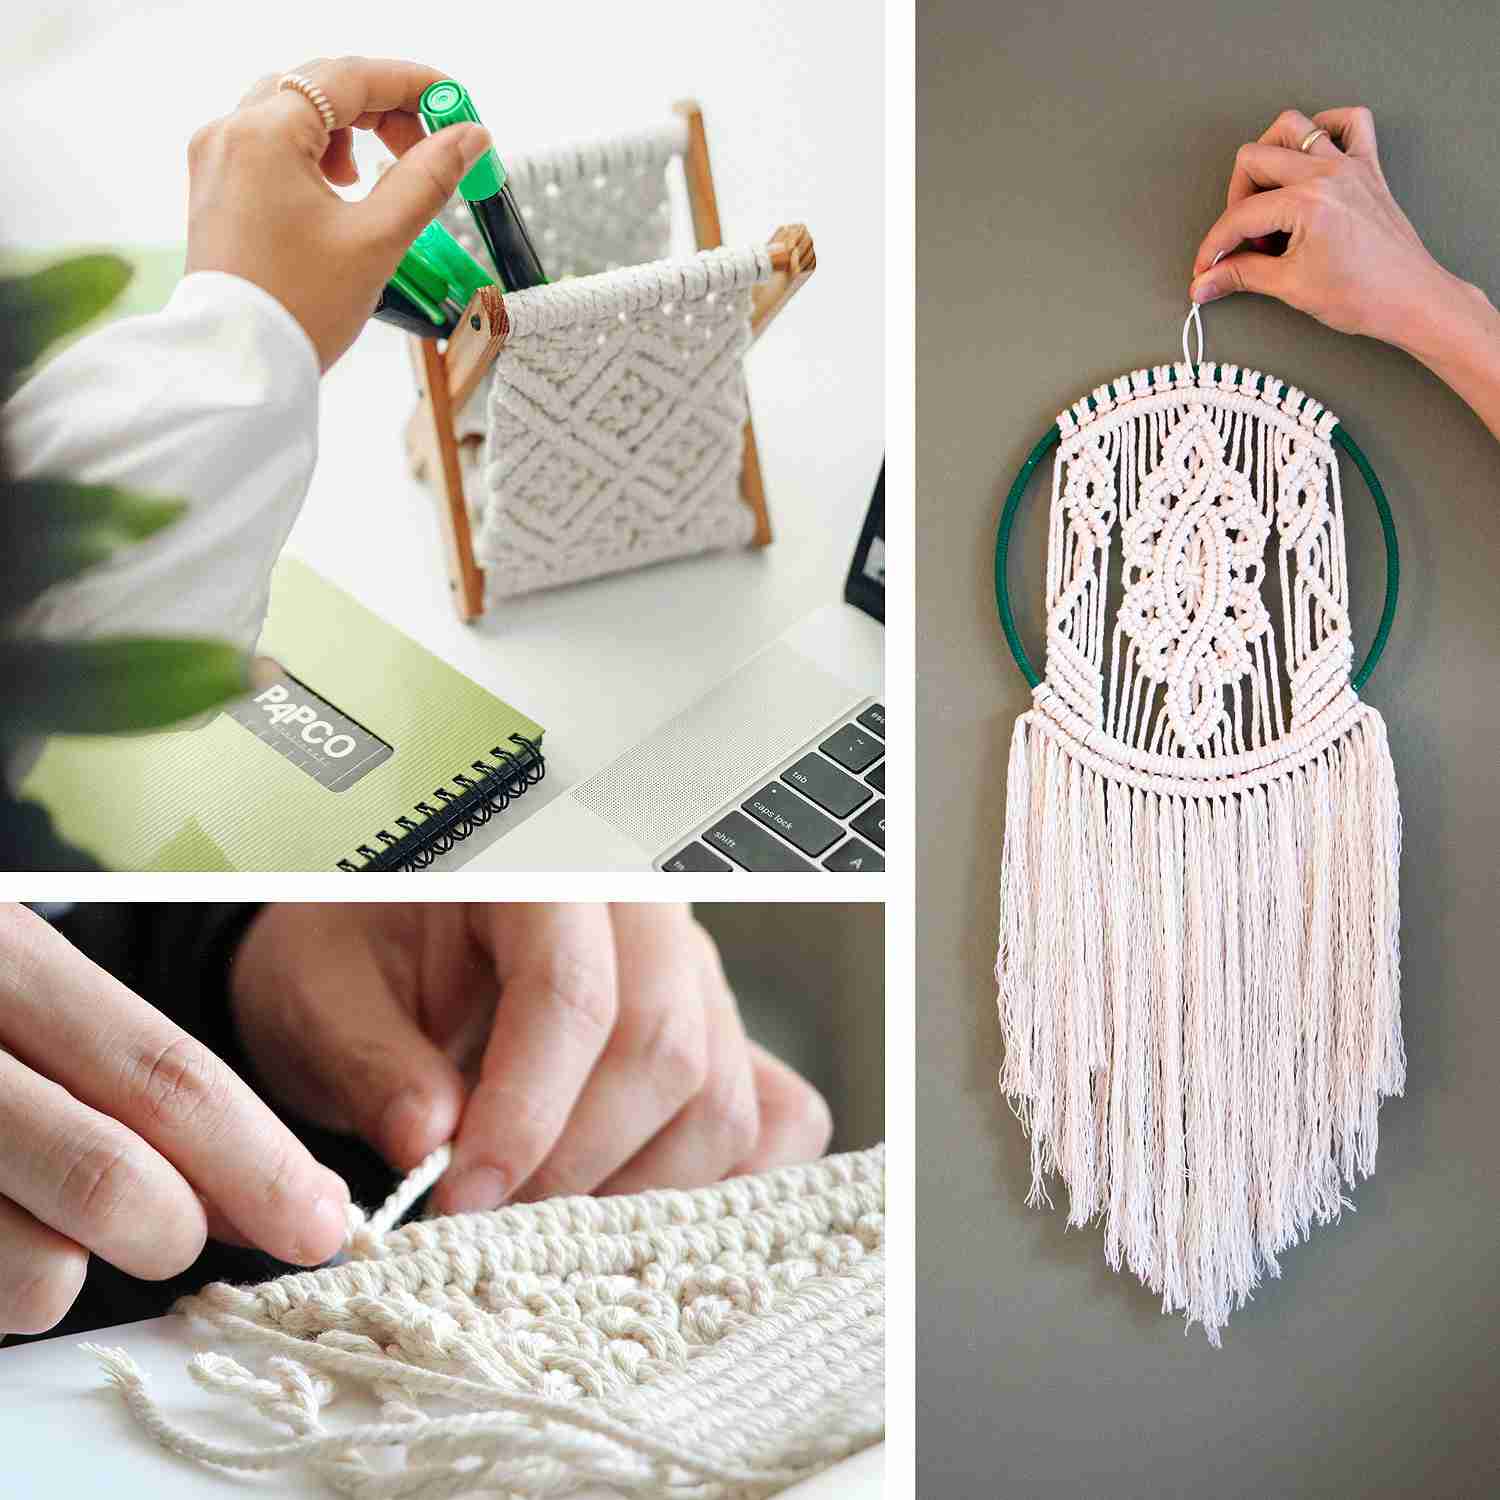 macrame-kits-for-adults-beginners-3mm-x-220yards with discount code